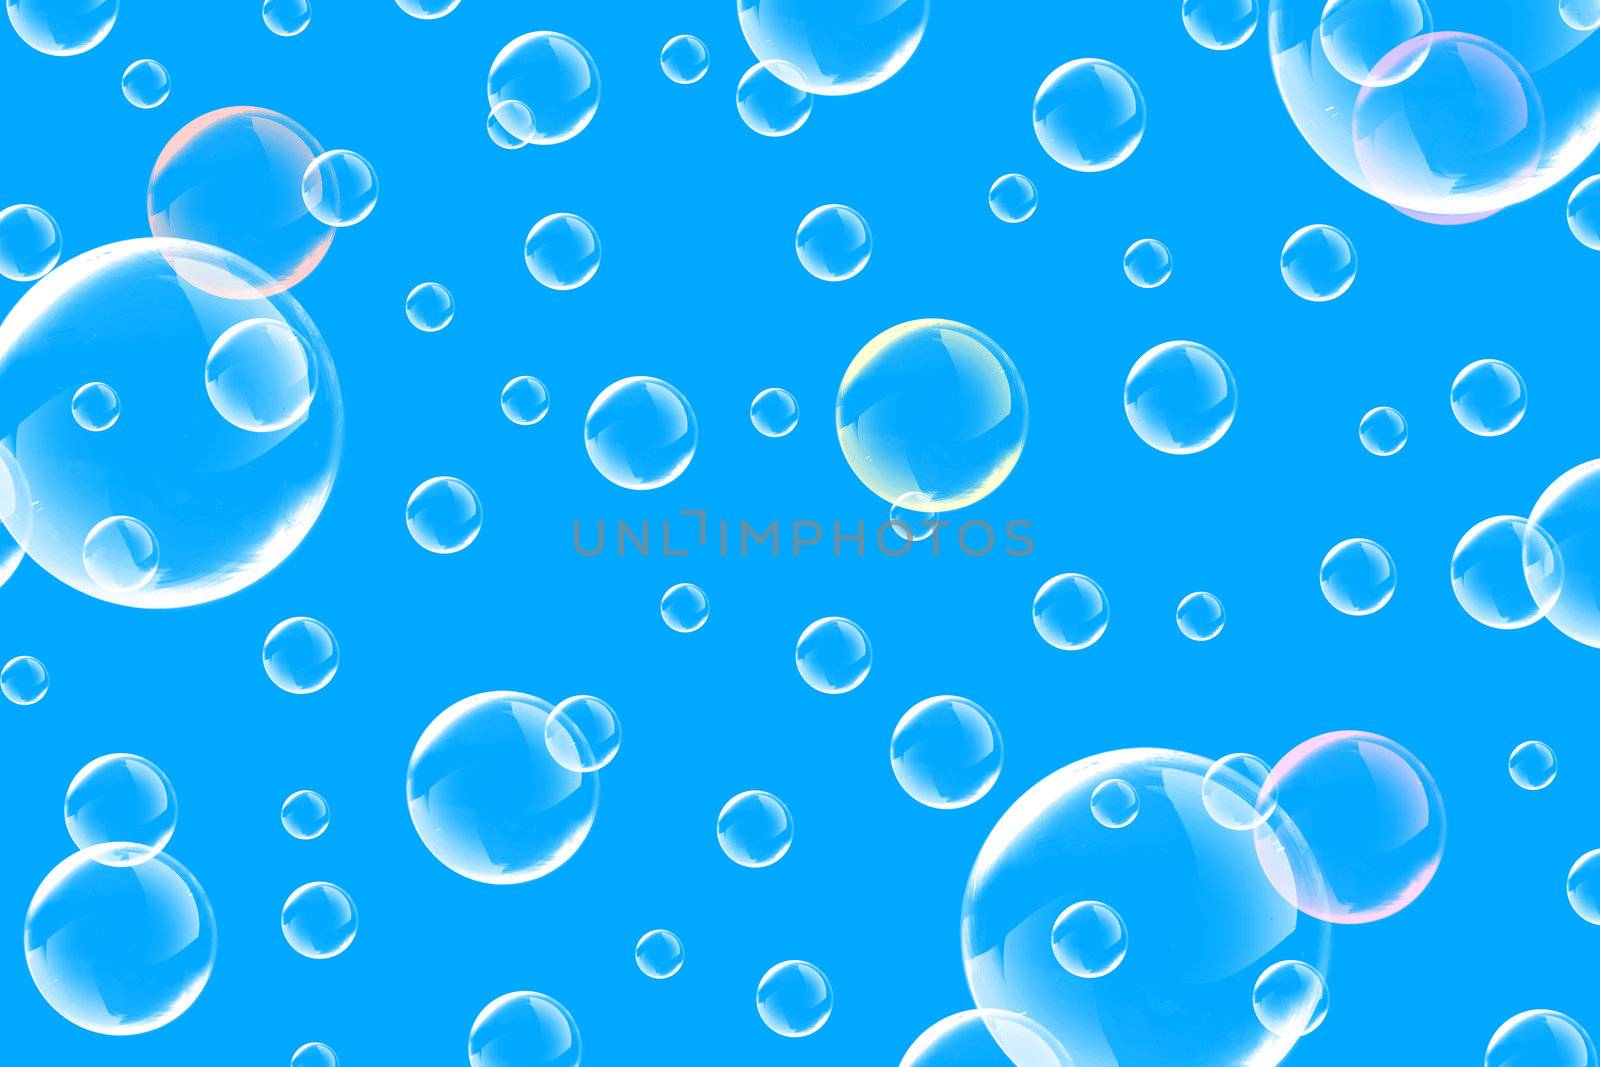 Soap bubbles on a blue background by petrkurgan